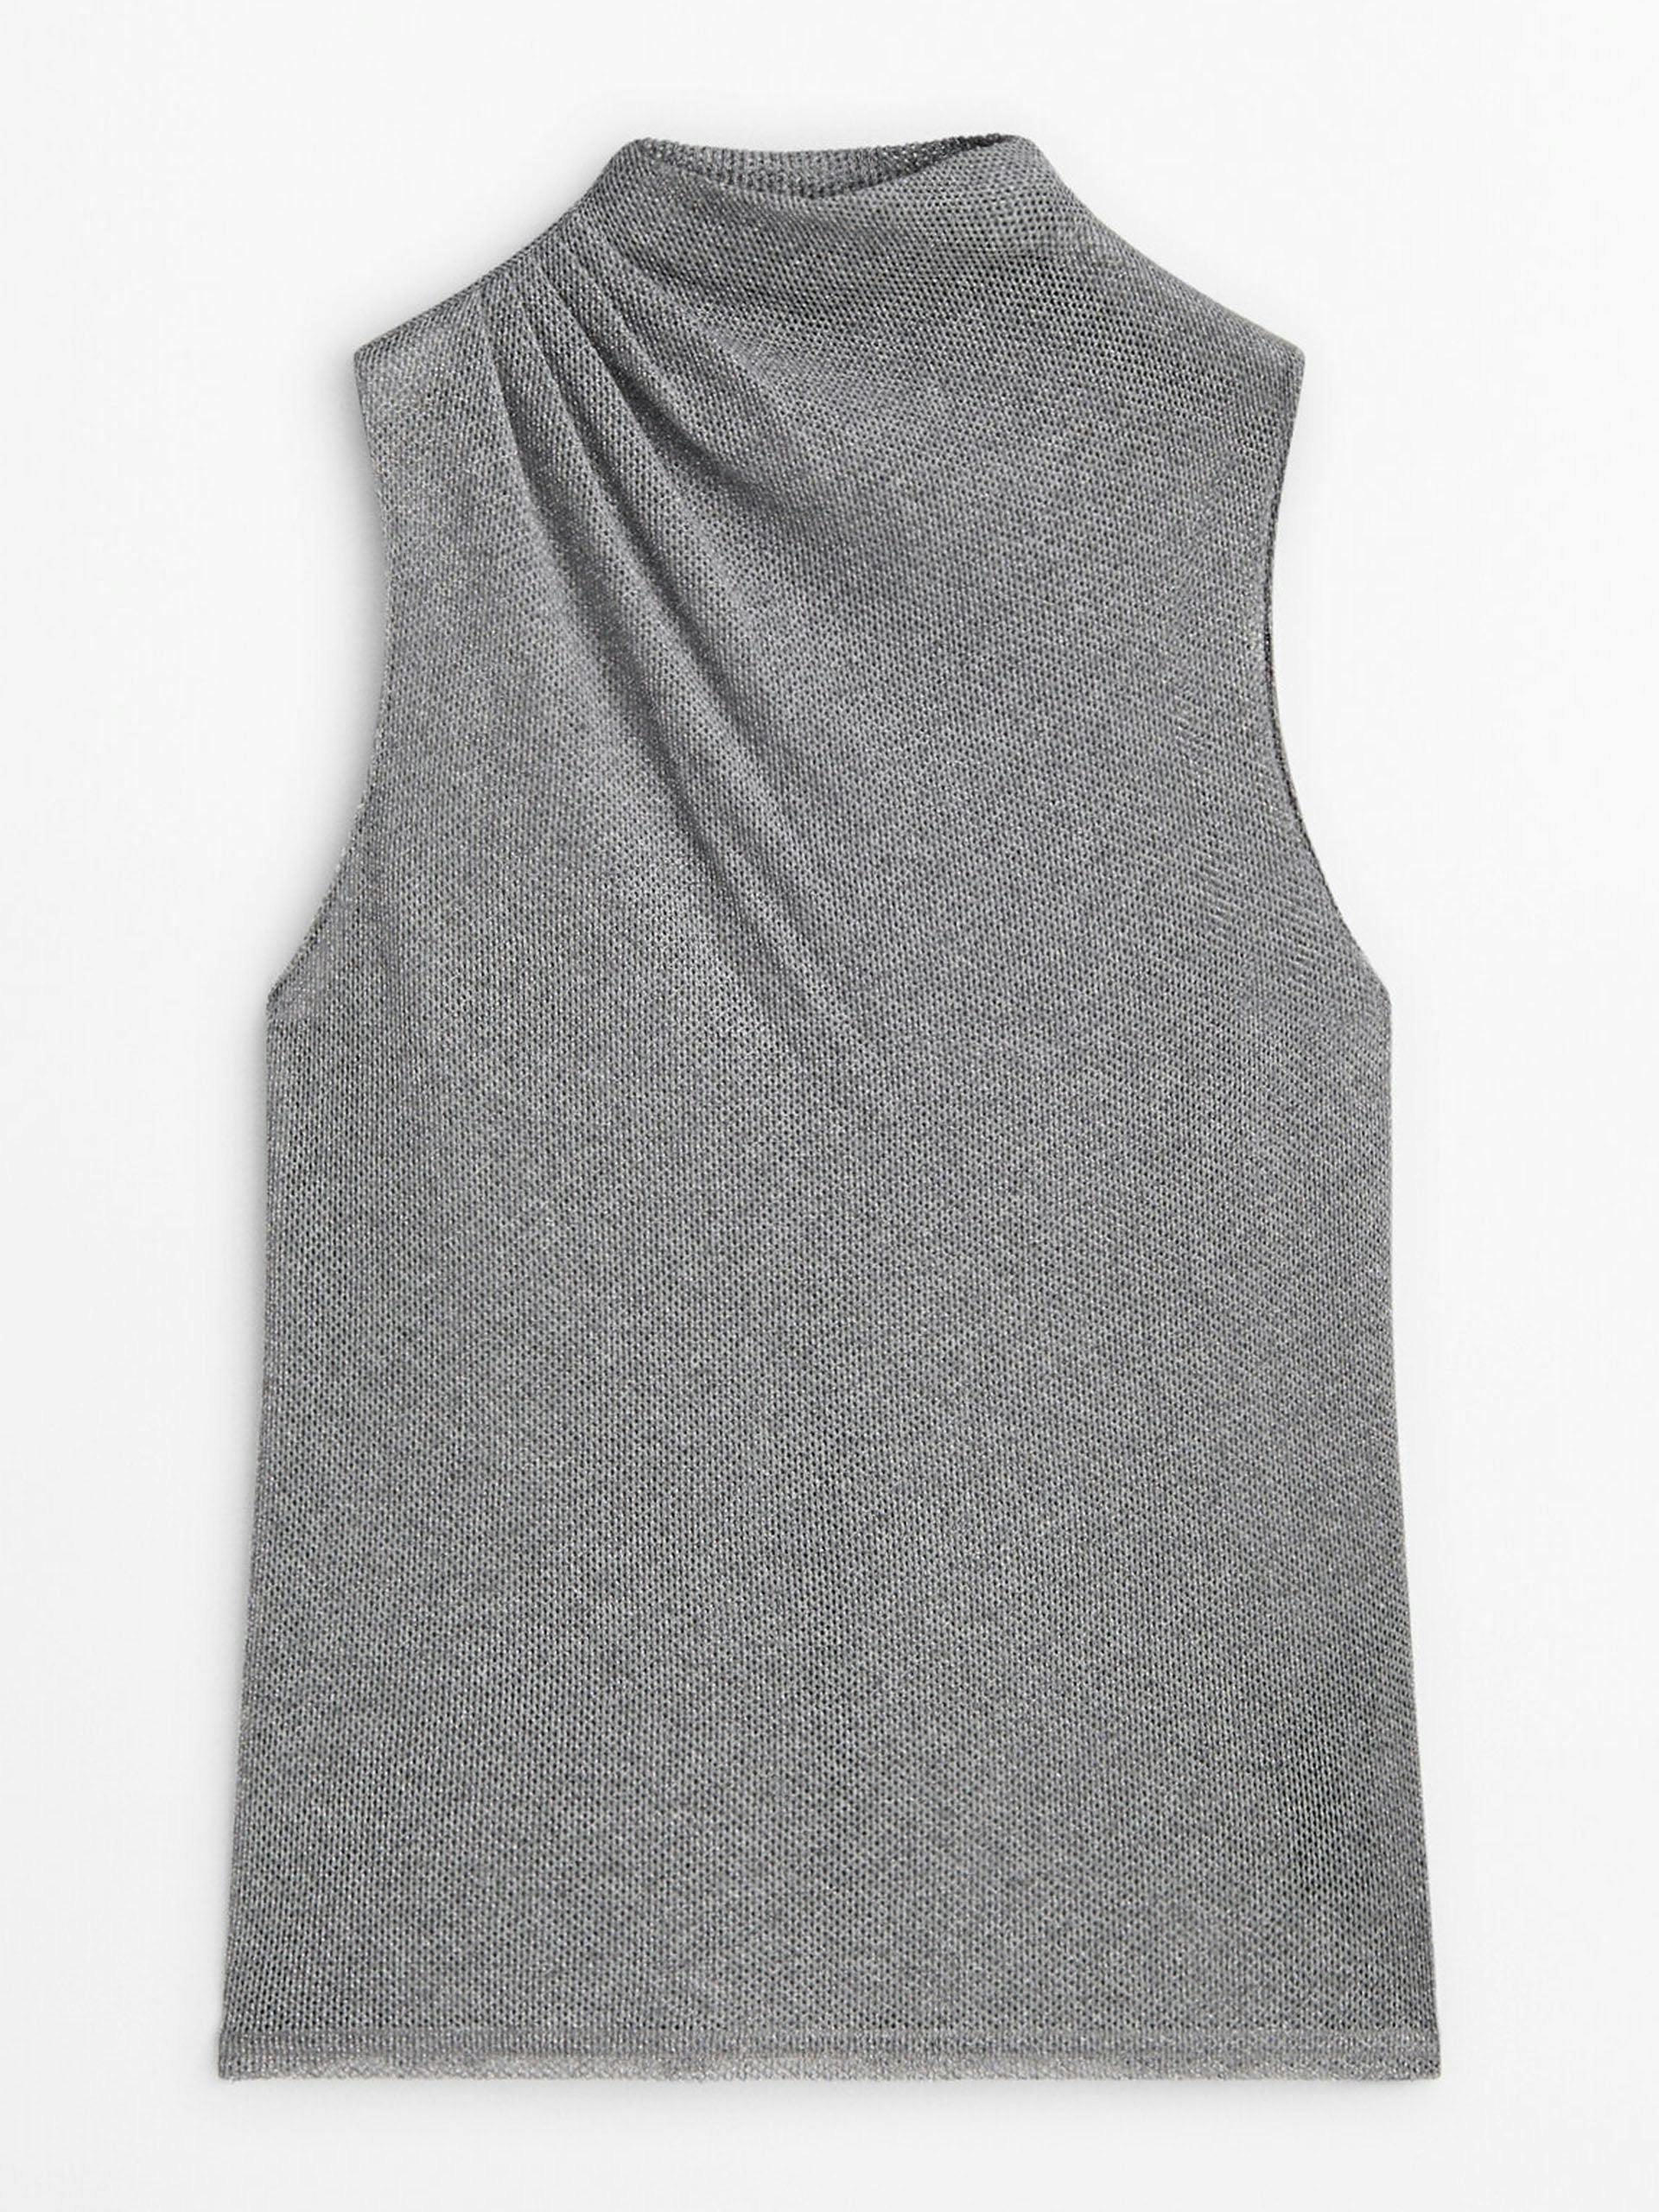 Shimmer top with draped detail